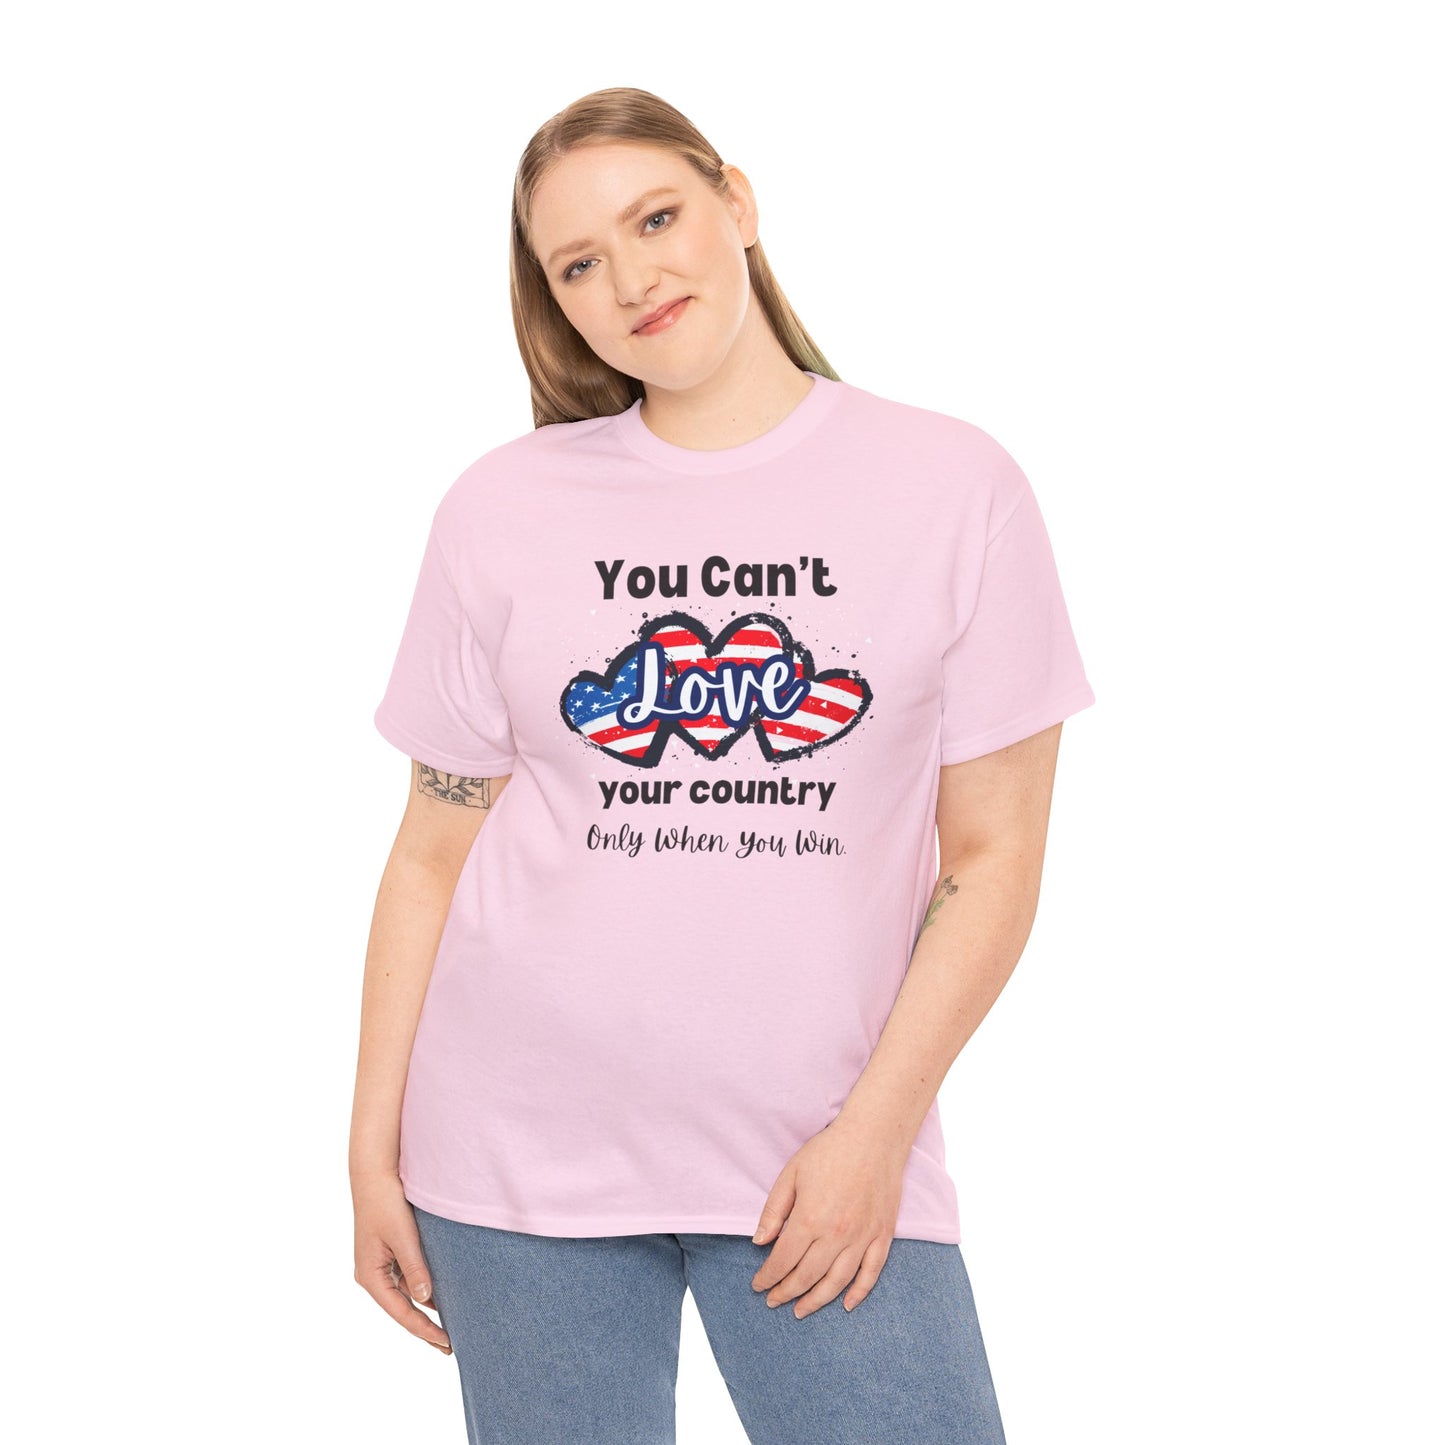 You can't love your country only when you win, pro democracy t-shirt, American flag, Hearts, Patriotic Tee, Anti Trump, Never Trumper